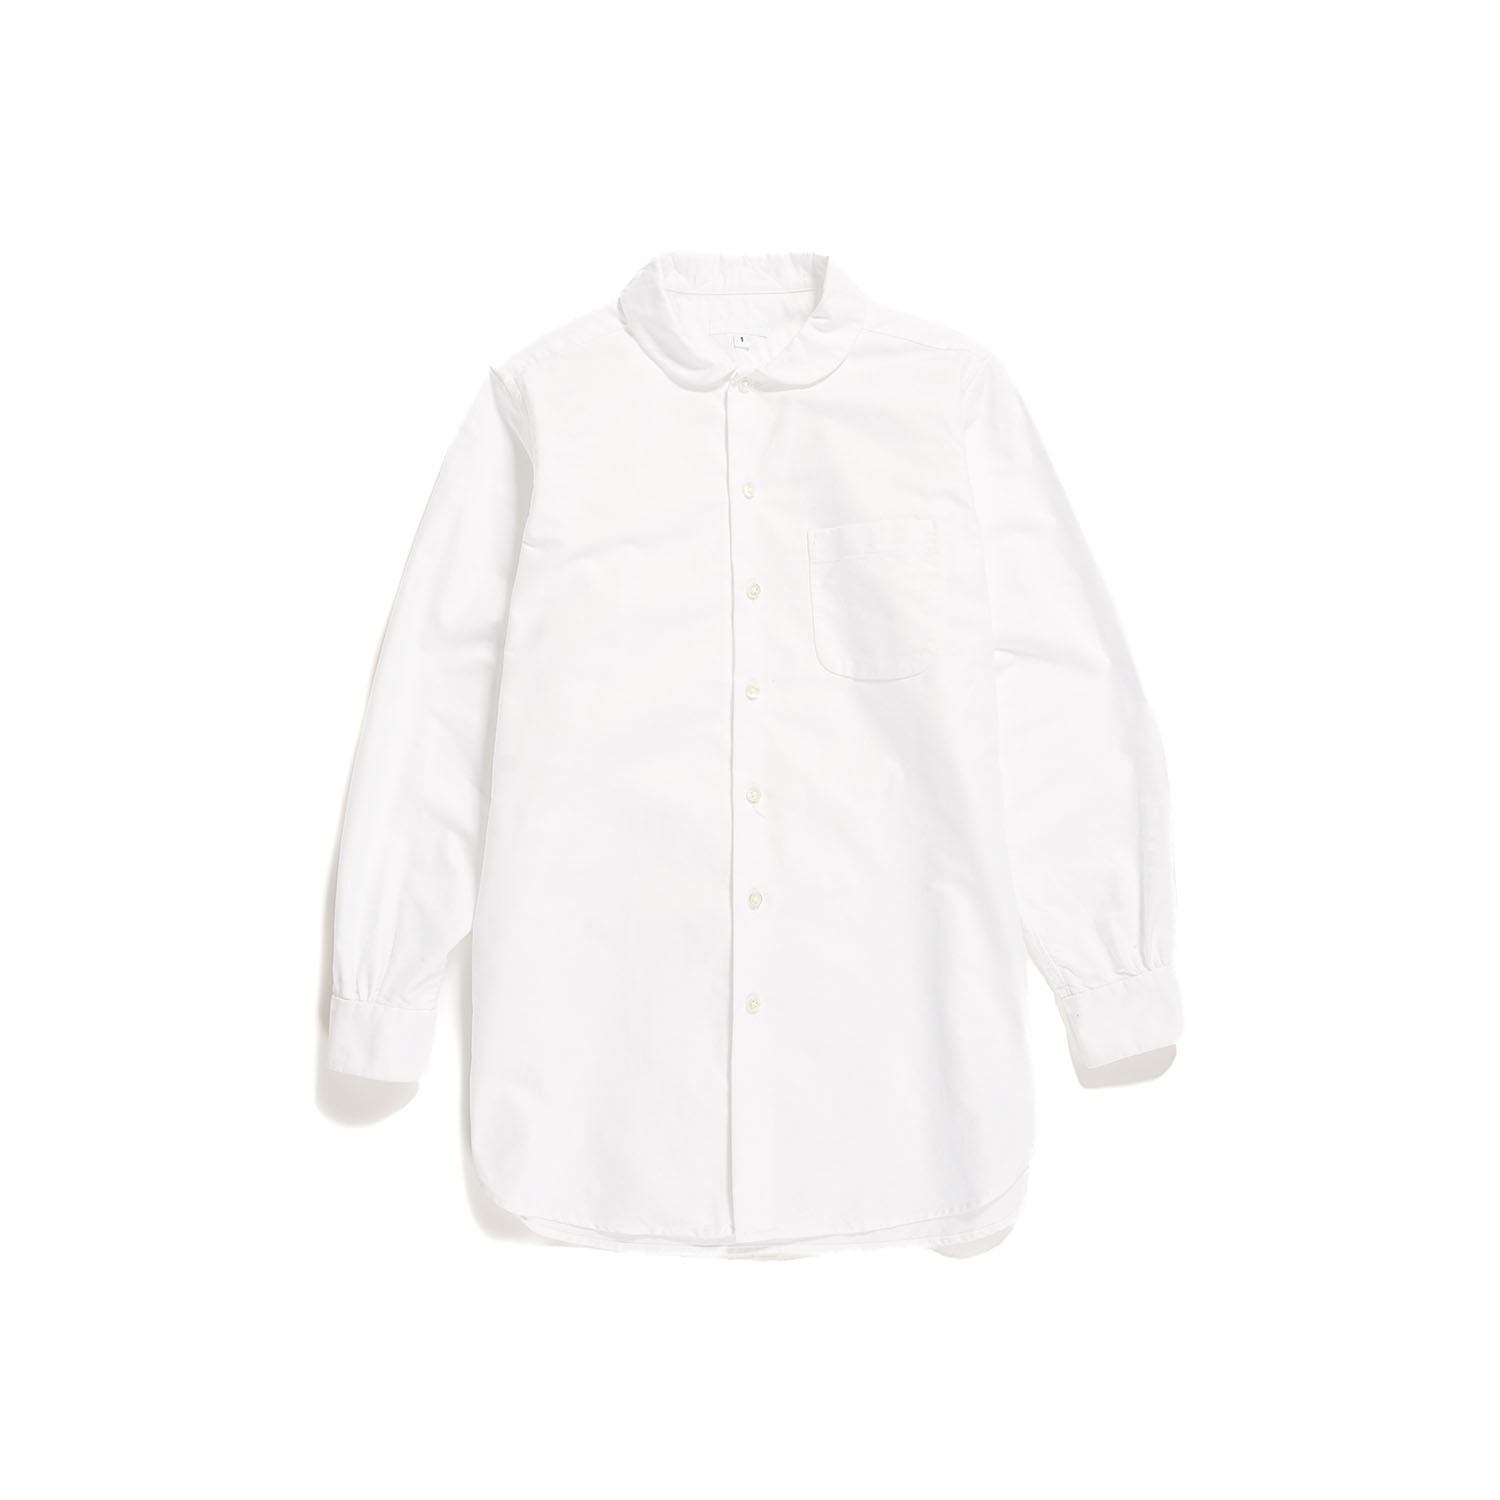 ﻿Rounded Collar Shirt - White (-30%)